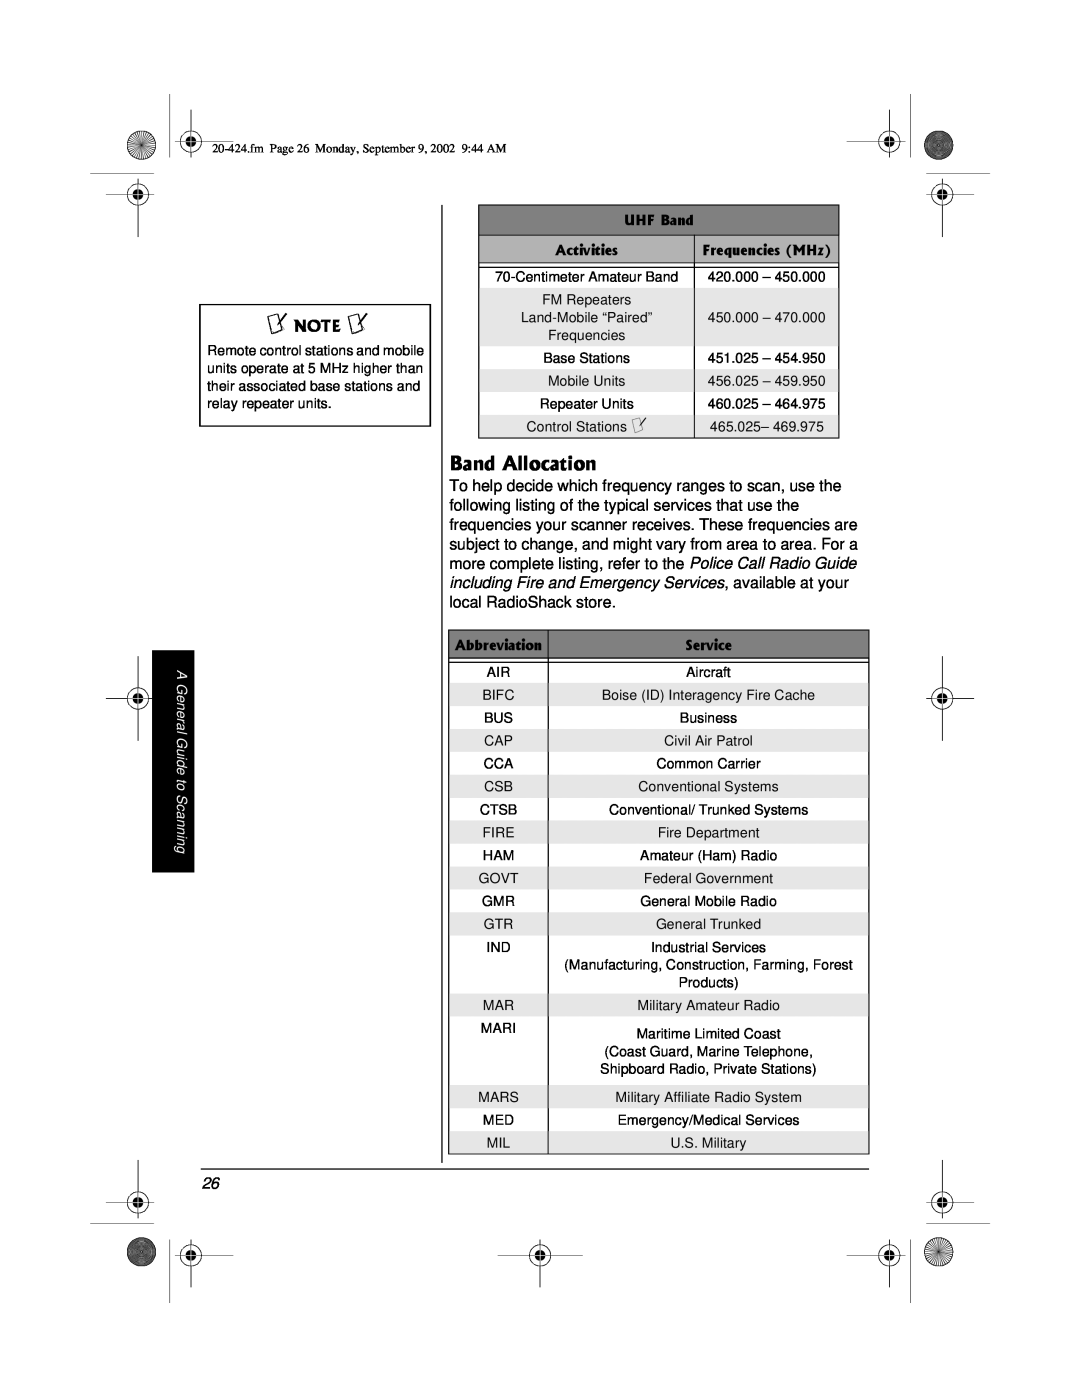 Radio Shack PRO-2018 manual $Cpf#Nnqecvkqp, ±016±, A General Guide to Scanning, fm Page 26 Monday, September 9, 2002 944 AM 